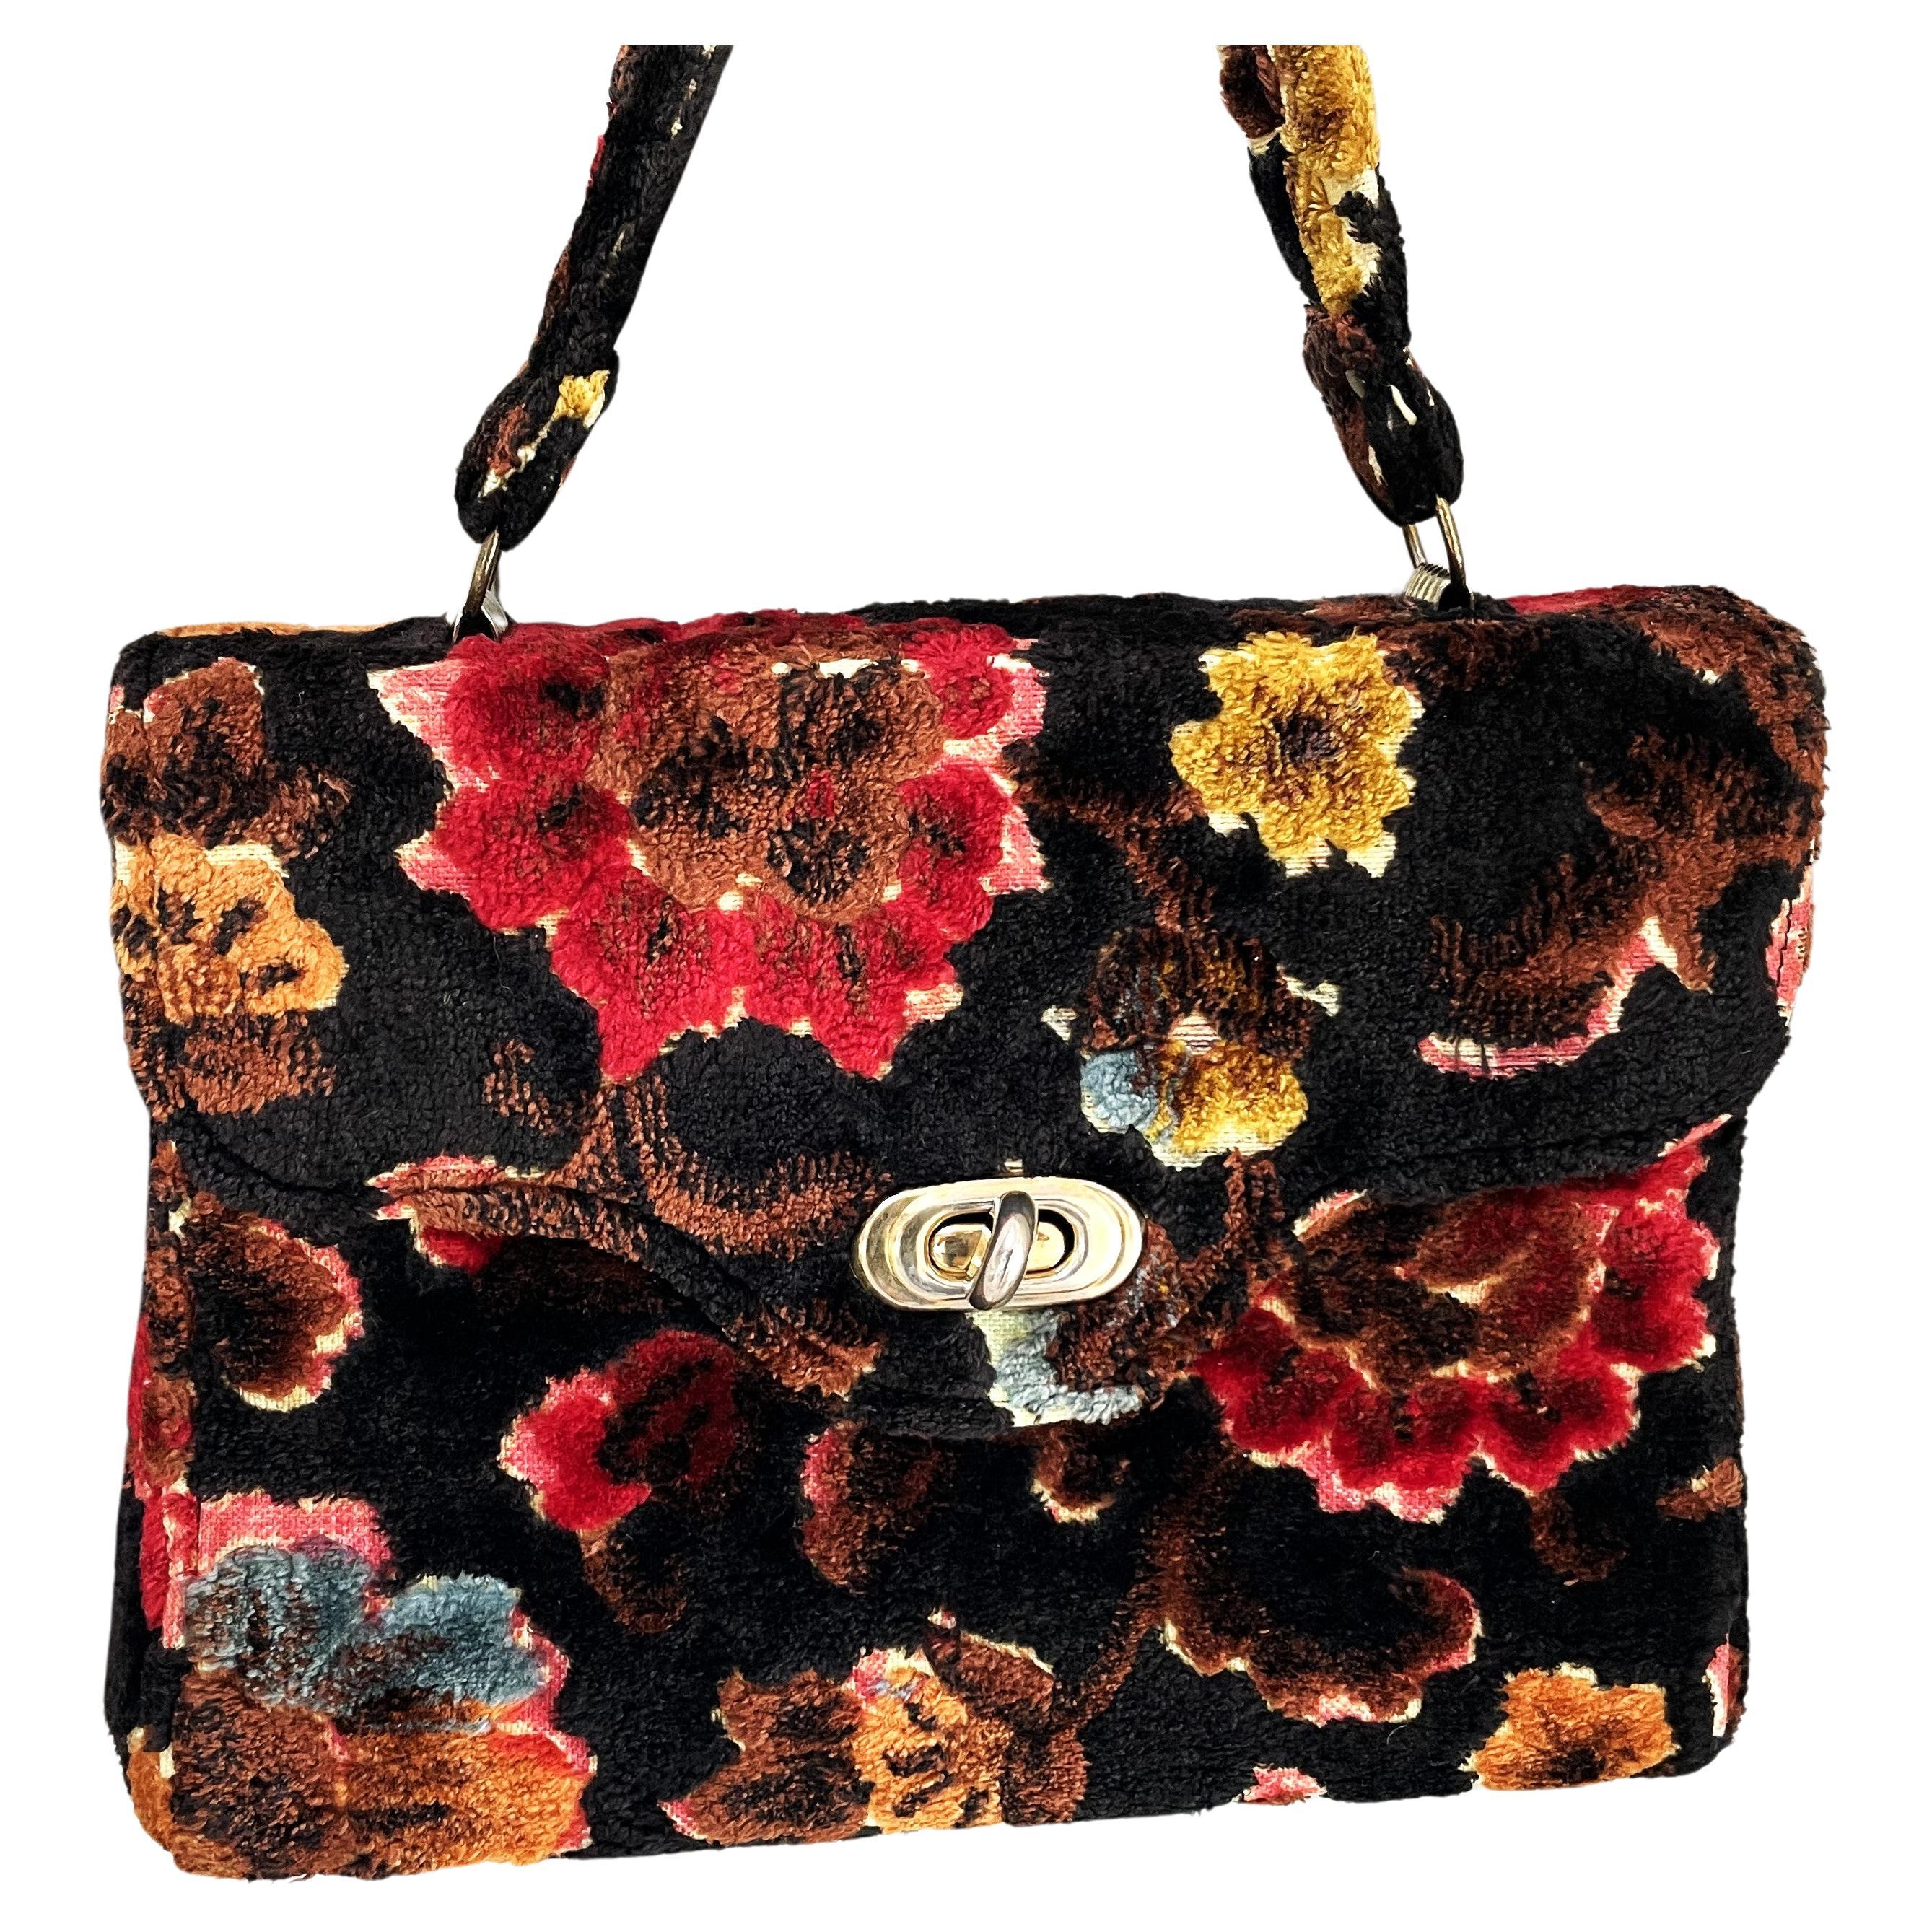 Vintage Handbag by 'Garay' USA, Chenille flowers in diferent colors, USA 1950s 